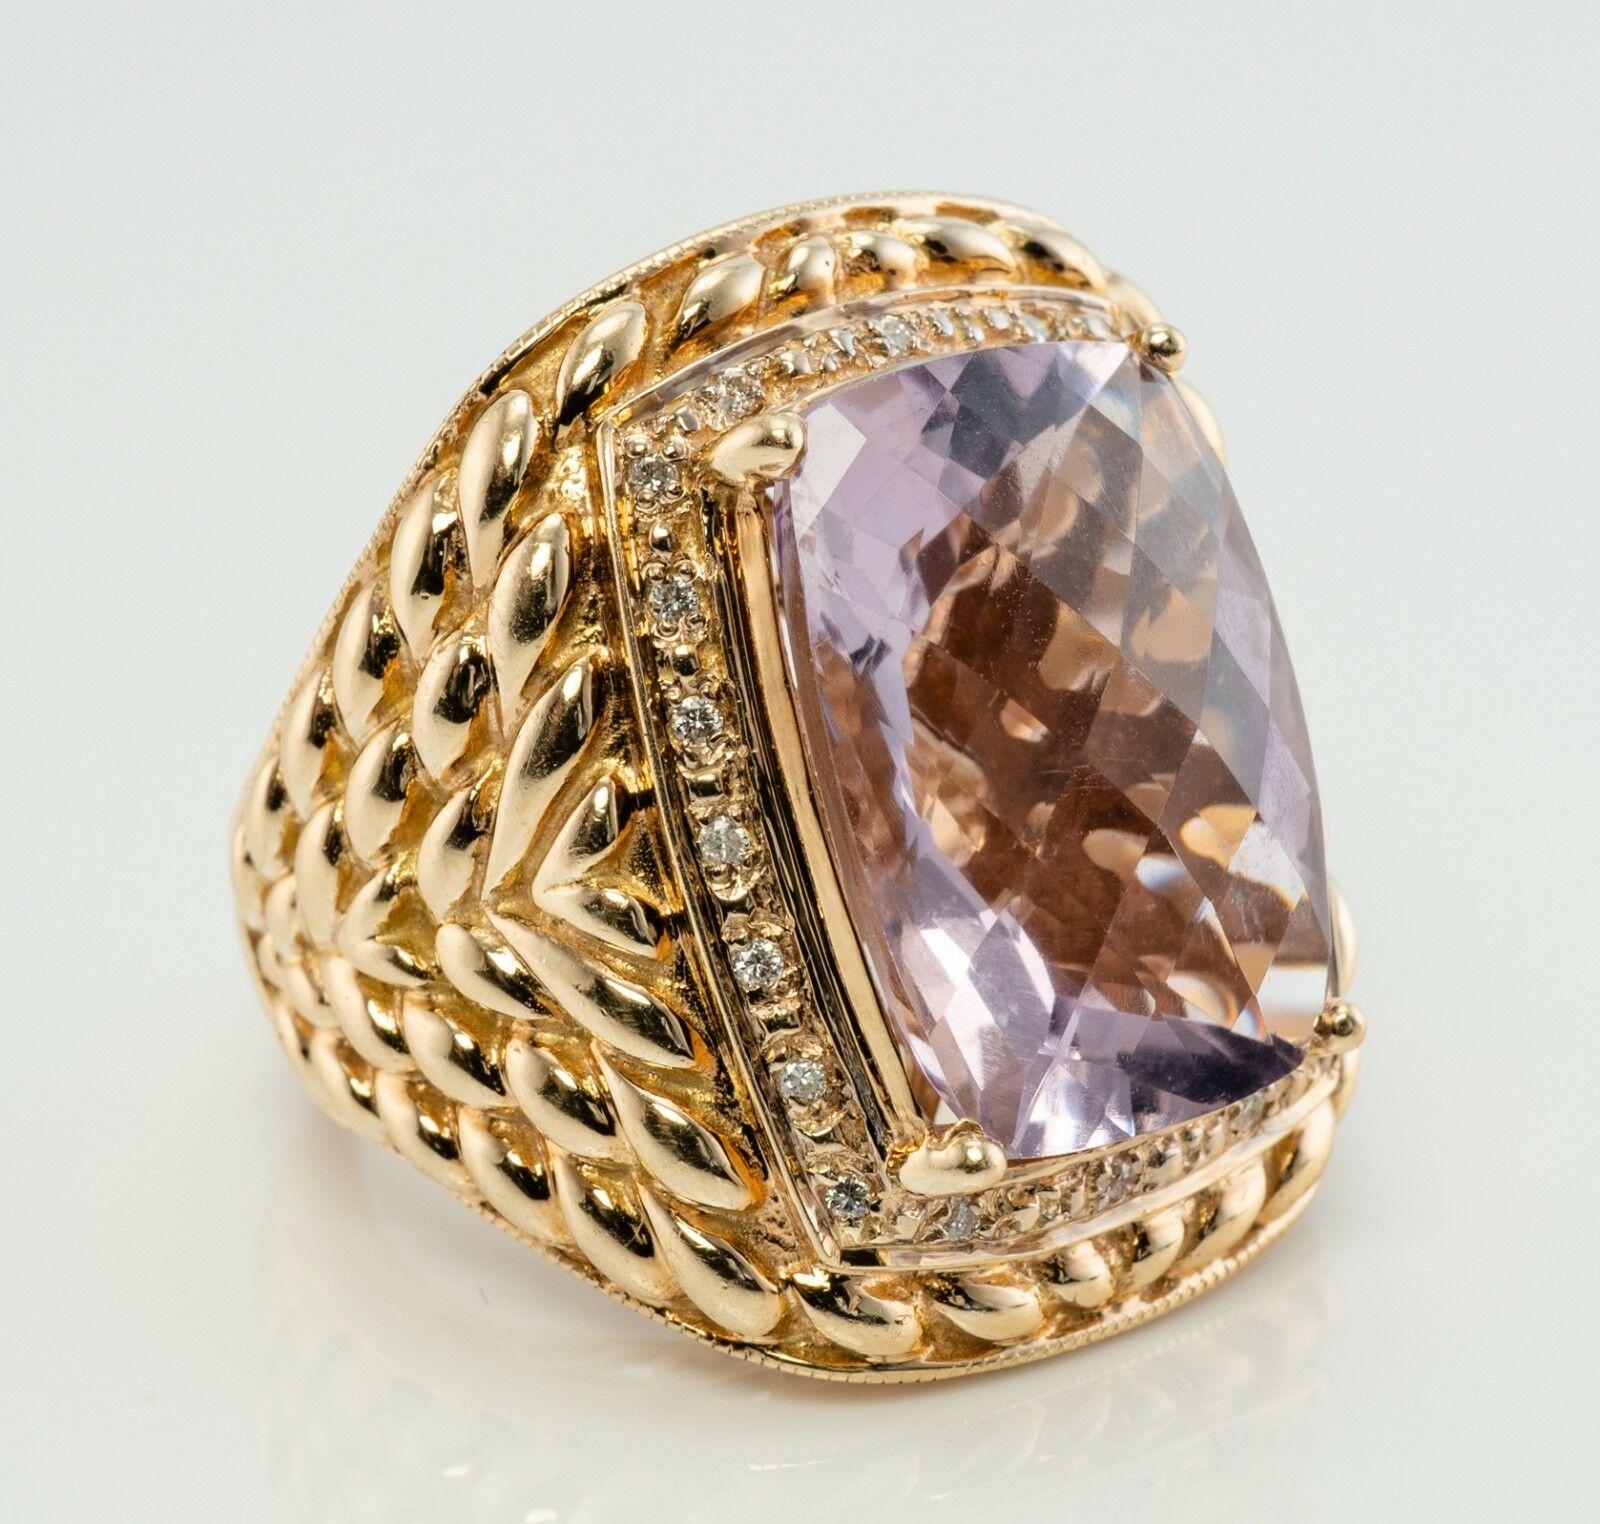 This amazing large and spectacular vintage ring is finely crafted in solid 14K Yellow Gold and is set with genuine Earth mined Amethyst and Diamonds. The center checkerboard Amethyst measures 18mm x 14mm (17.30cts). Twenty small but white and fiery